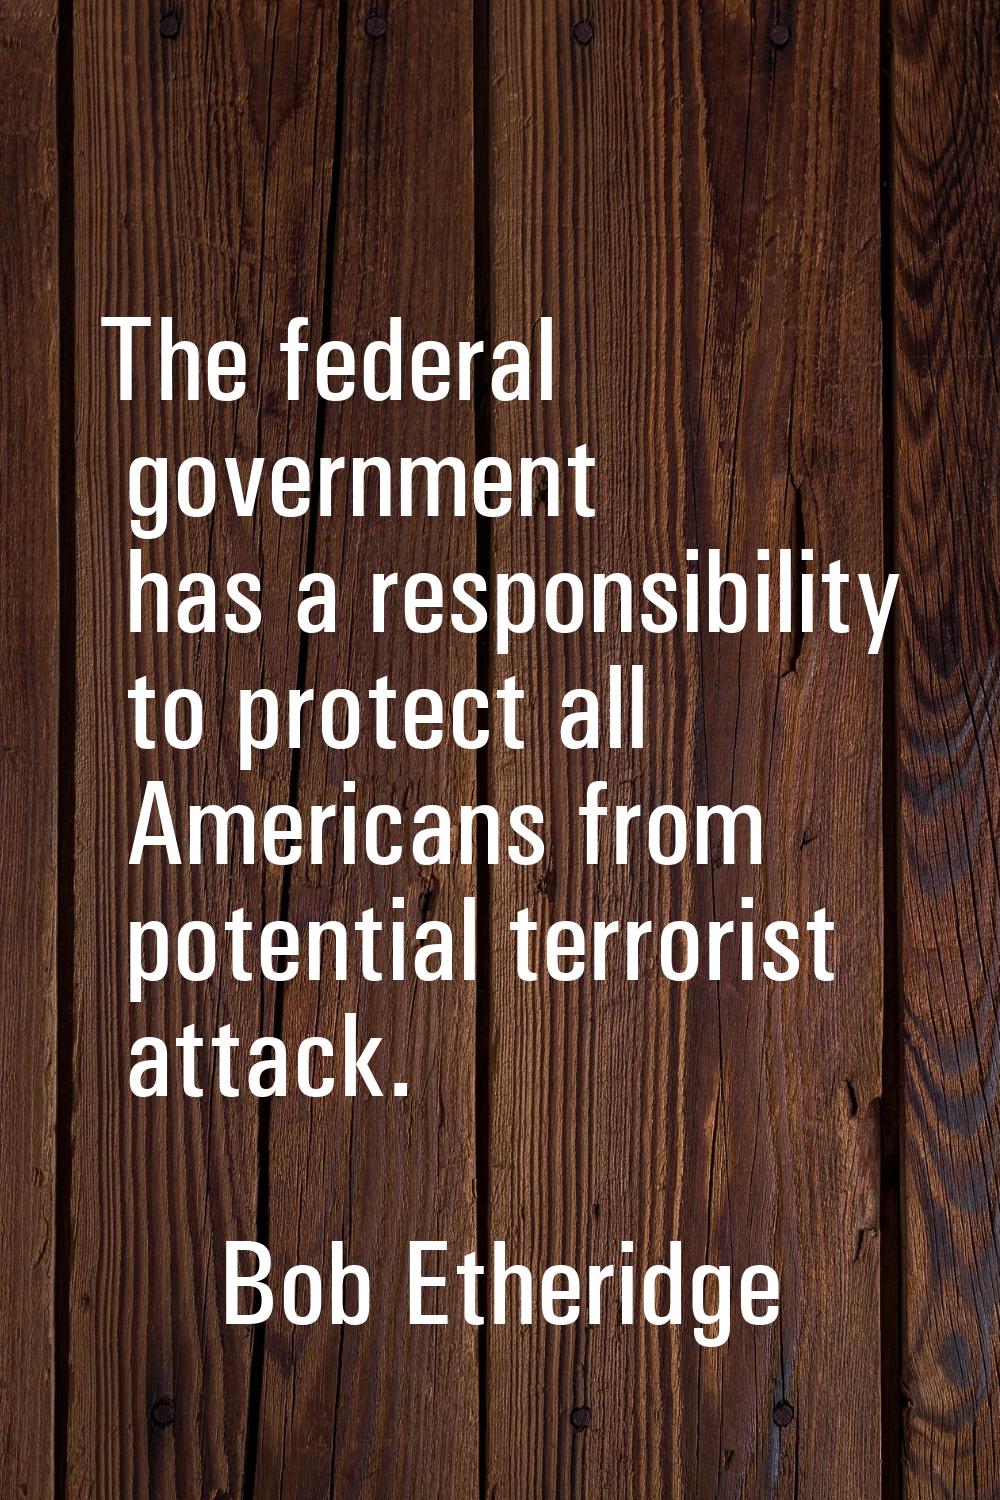 The federal government has a responsibility to protect all Americans from potential terrorist attac